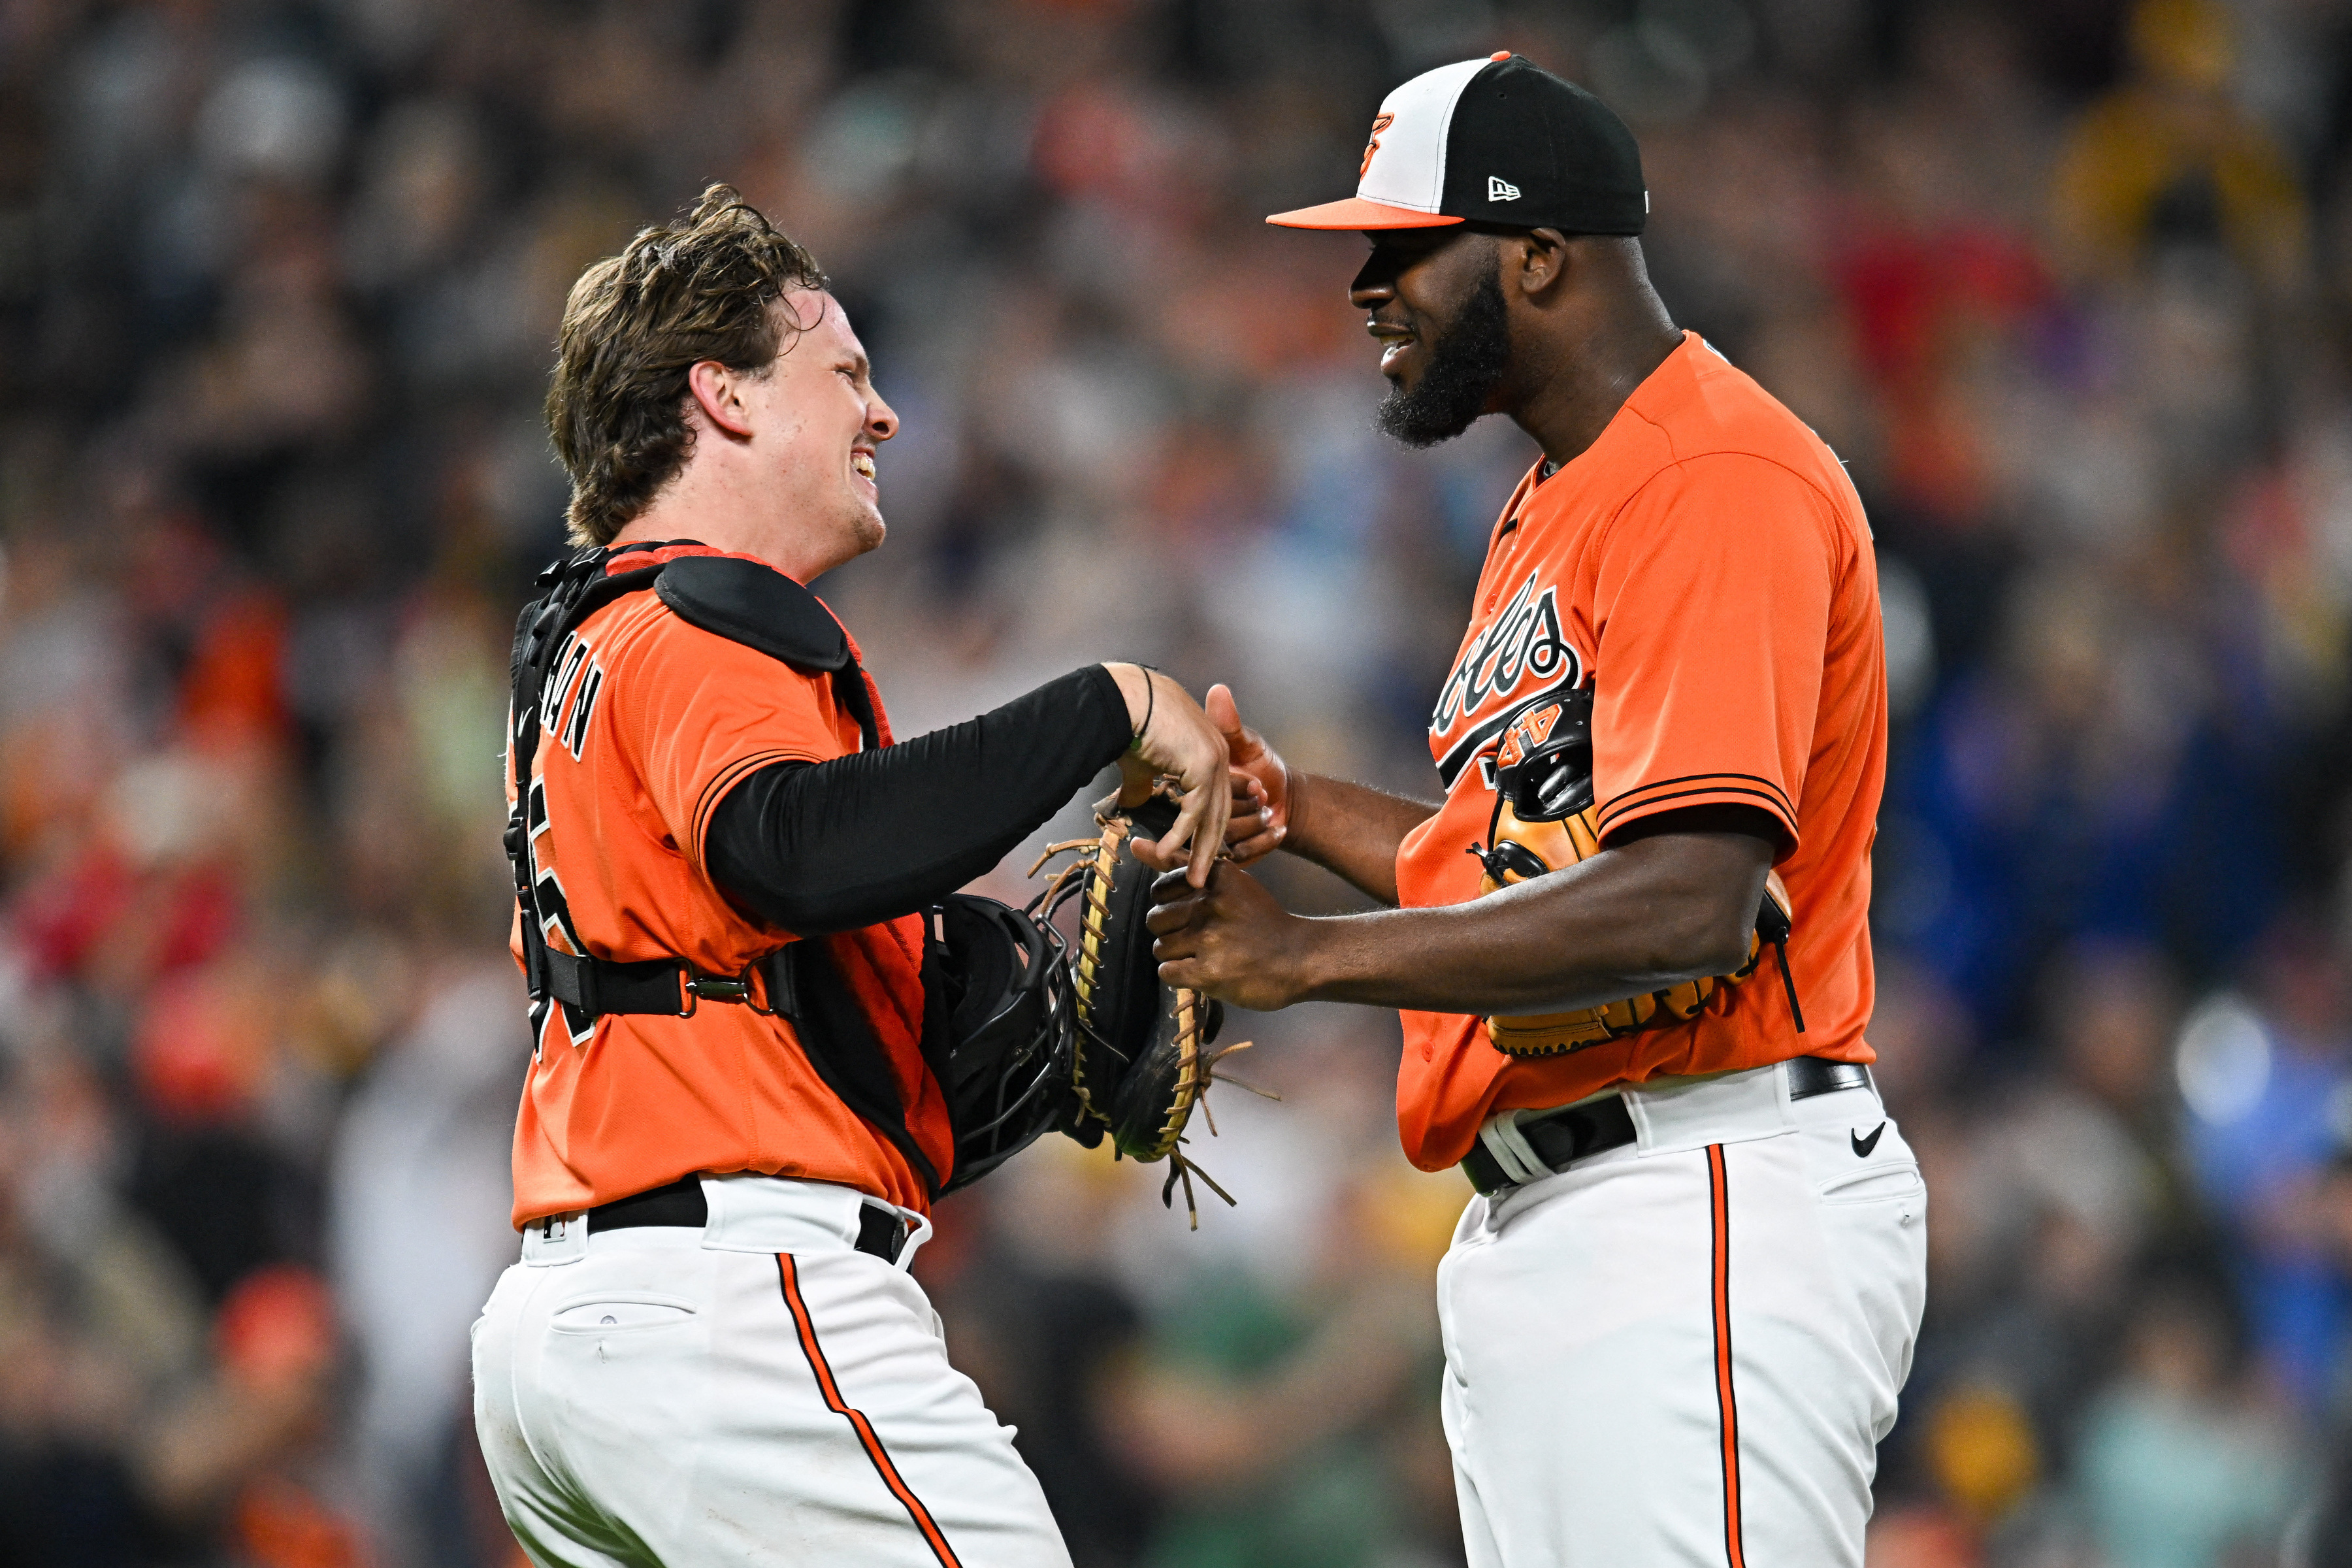 Cedric Mullins hits for the cycle in Orioles' 6-3 win over Pirates, National Sports